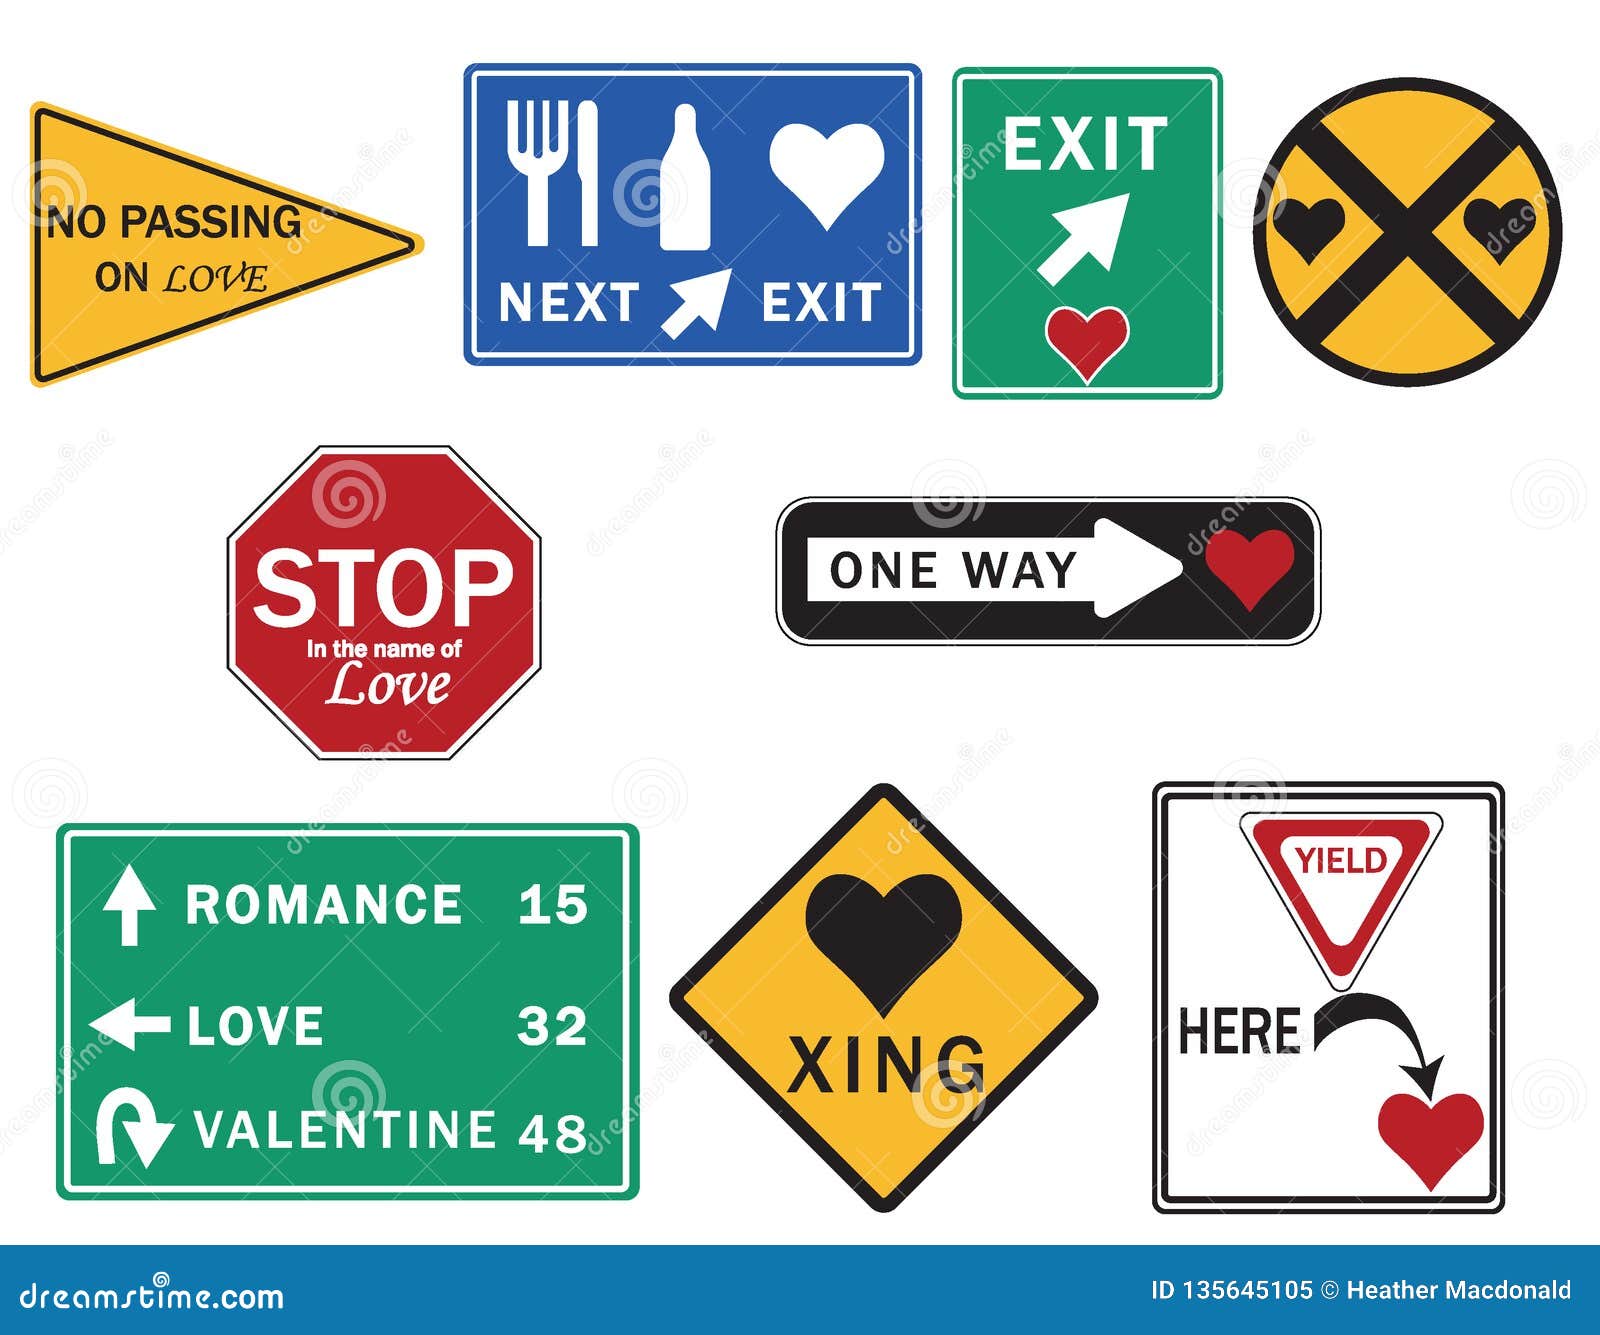 Road Signs To Love A Collection Of Love Inspired Road Signs Stock Illustration Illustration Of Blue Exit